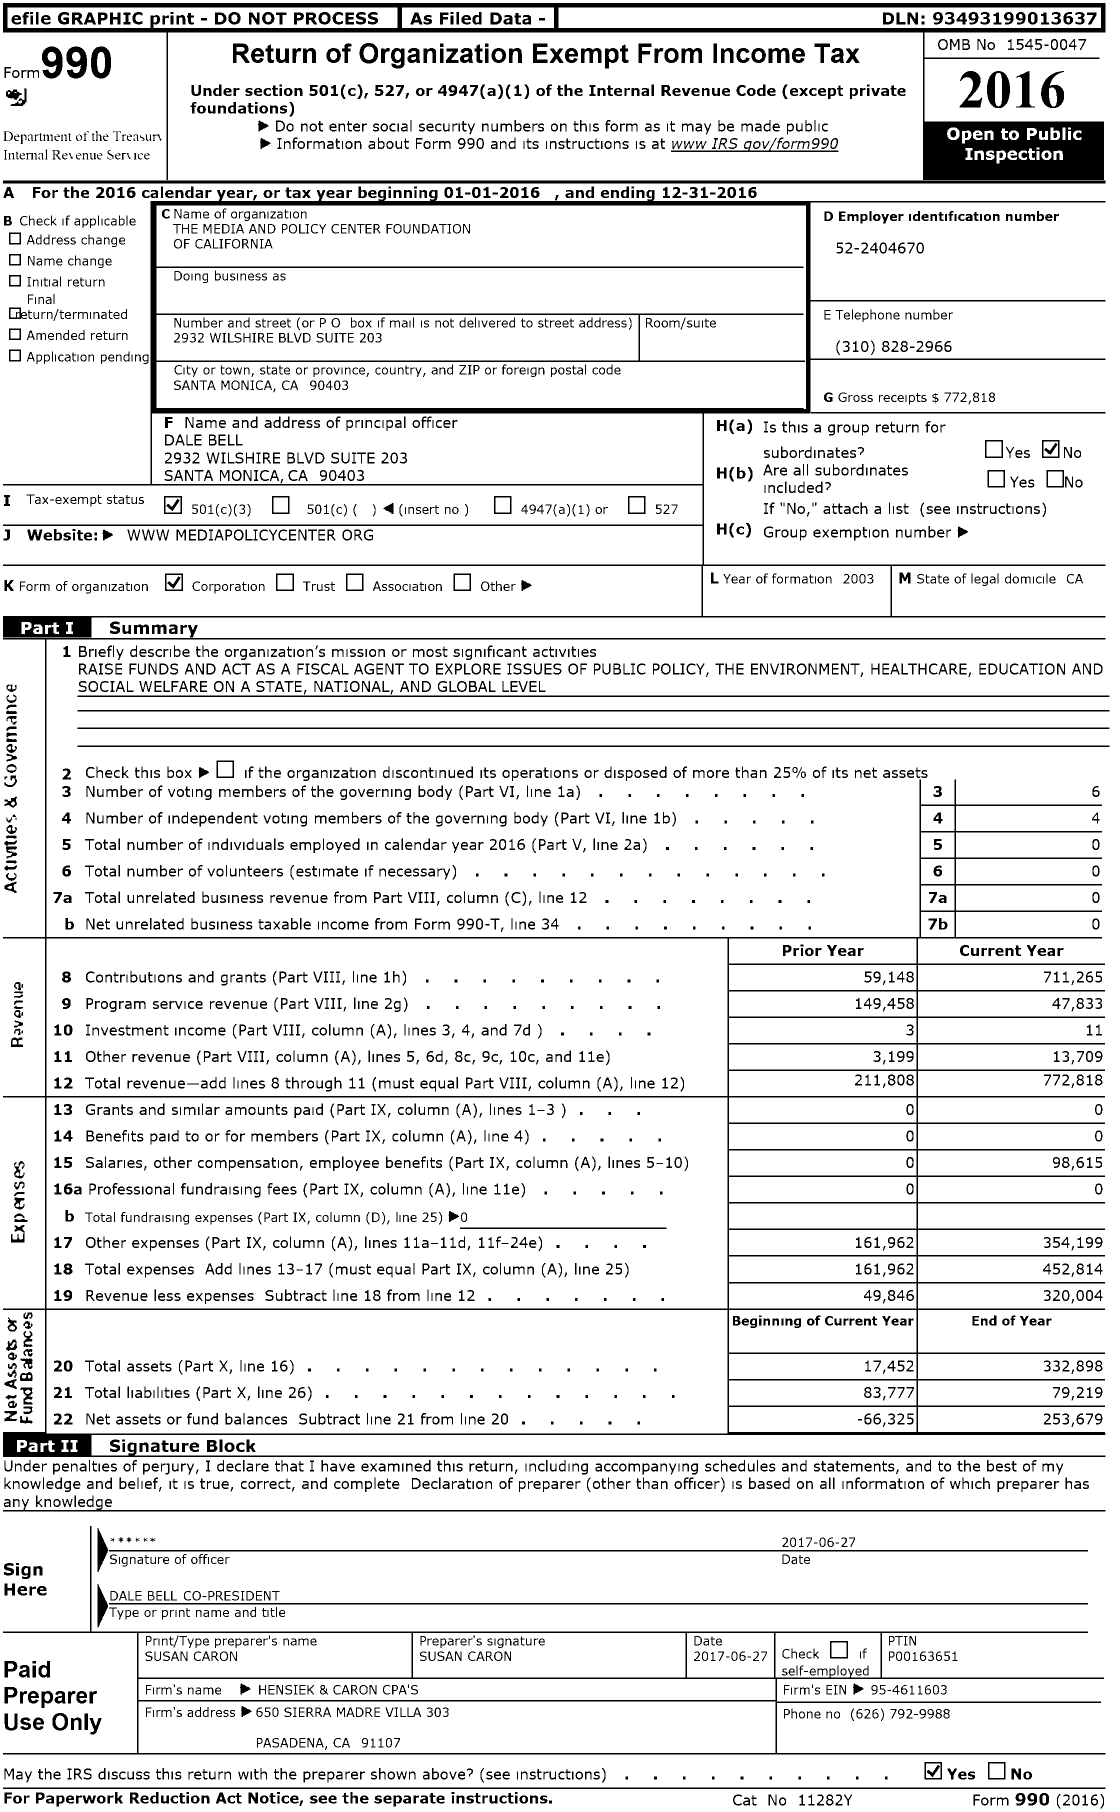 Image of first page of 2016 Form 990 for The Media and Policy Center Foundation of California